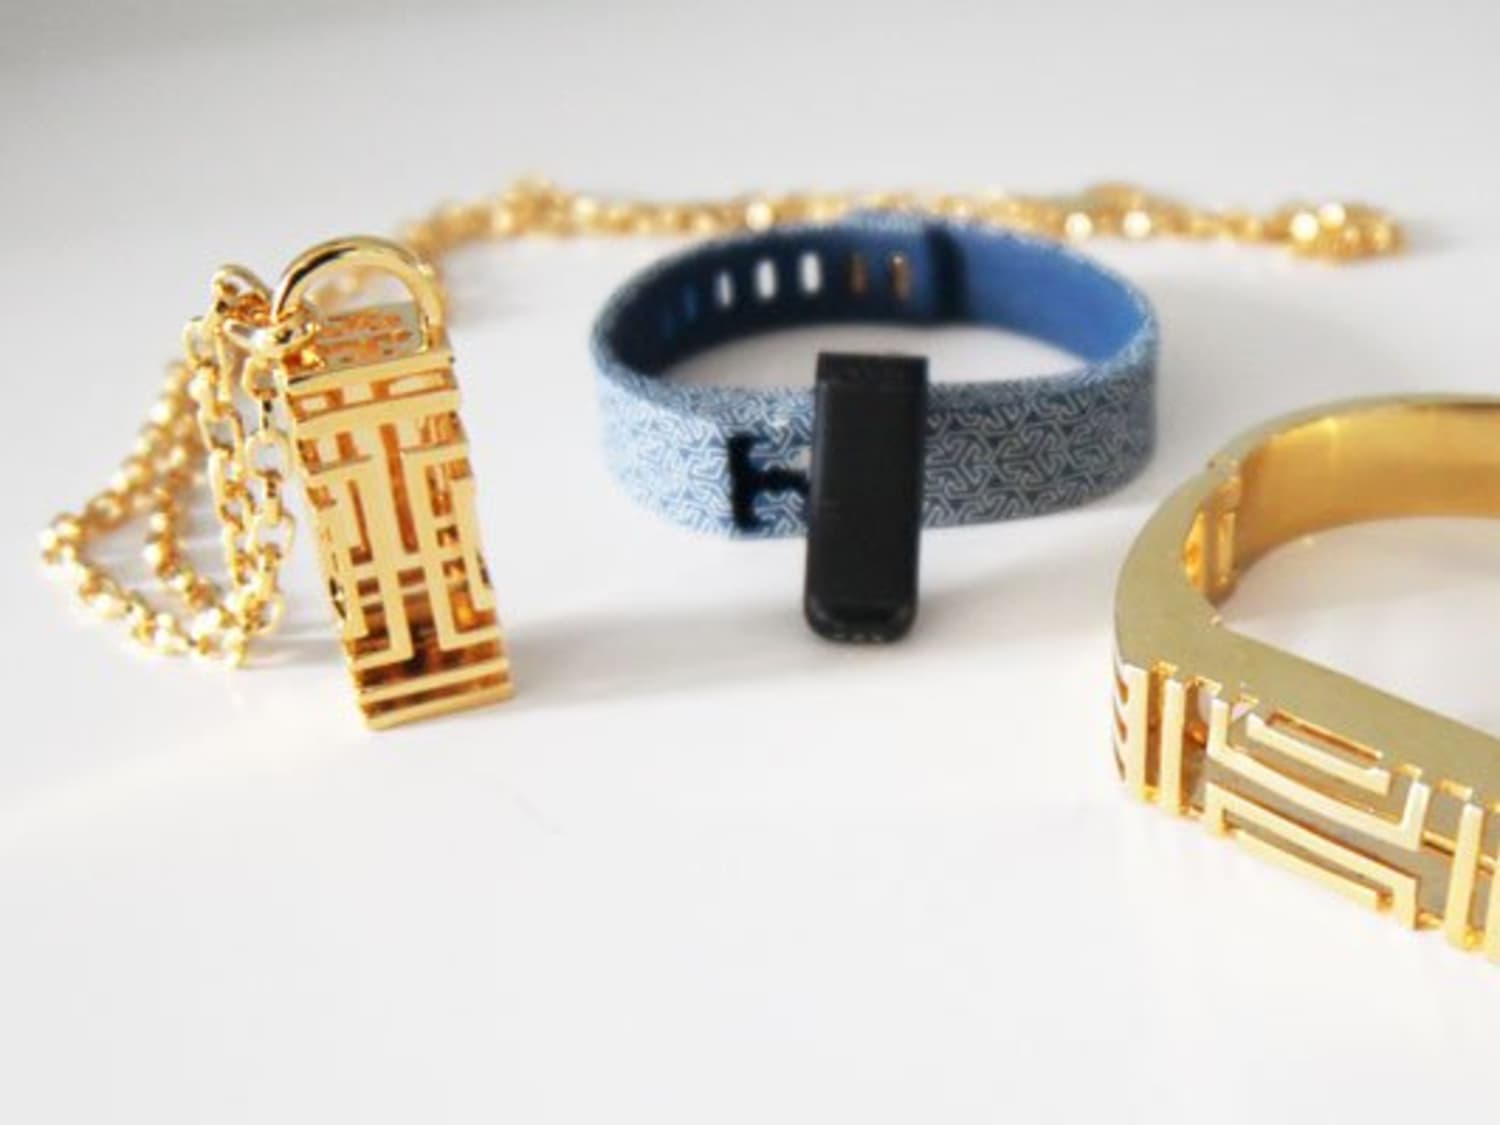 Fitbit's Tory Burch jewelry makes your activity tracker slightly more  fashionable